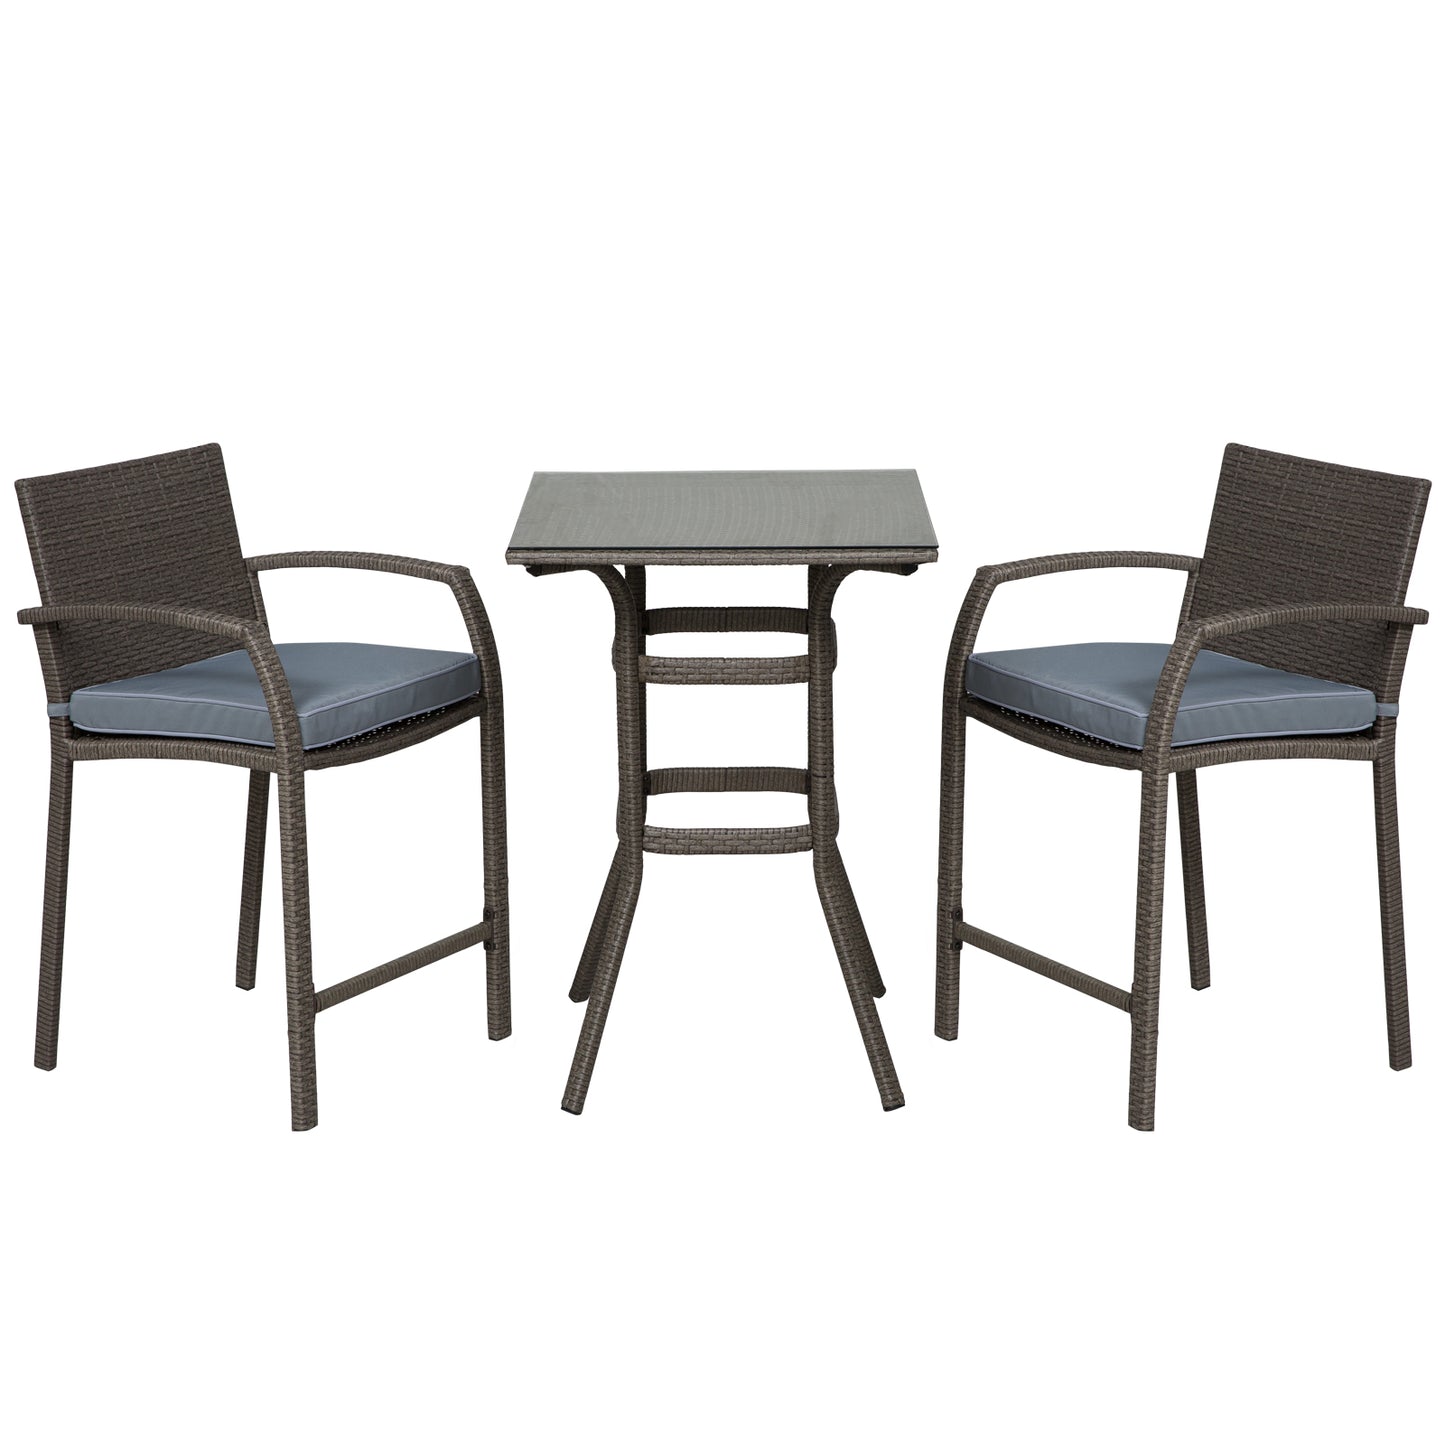 3 Pieces Patio Bar Set Wicker Garden Bistro Set Outdoor Furniture PE Rattan Table and Stools with Seat Cushion, Grey - Gallery Canada